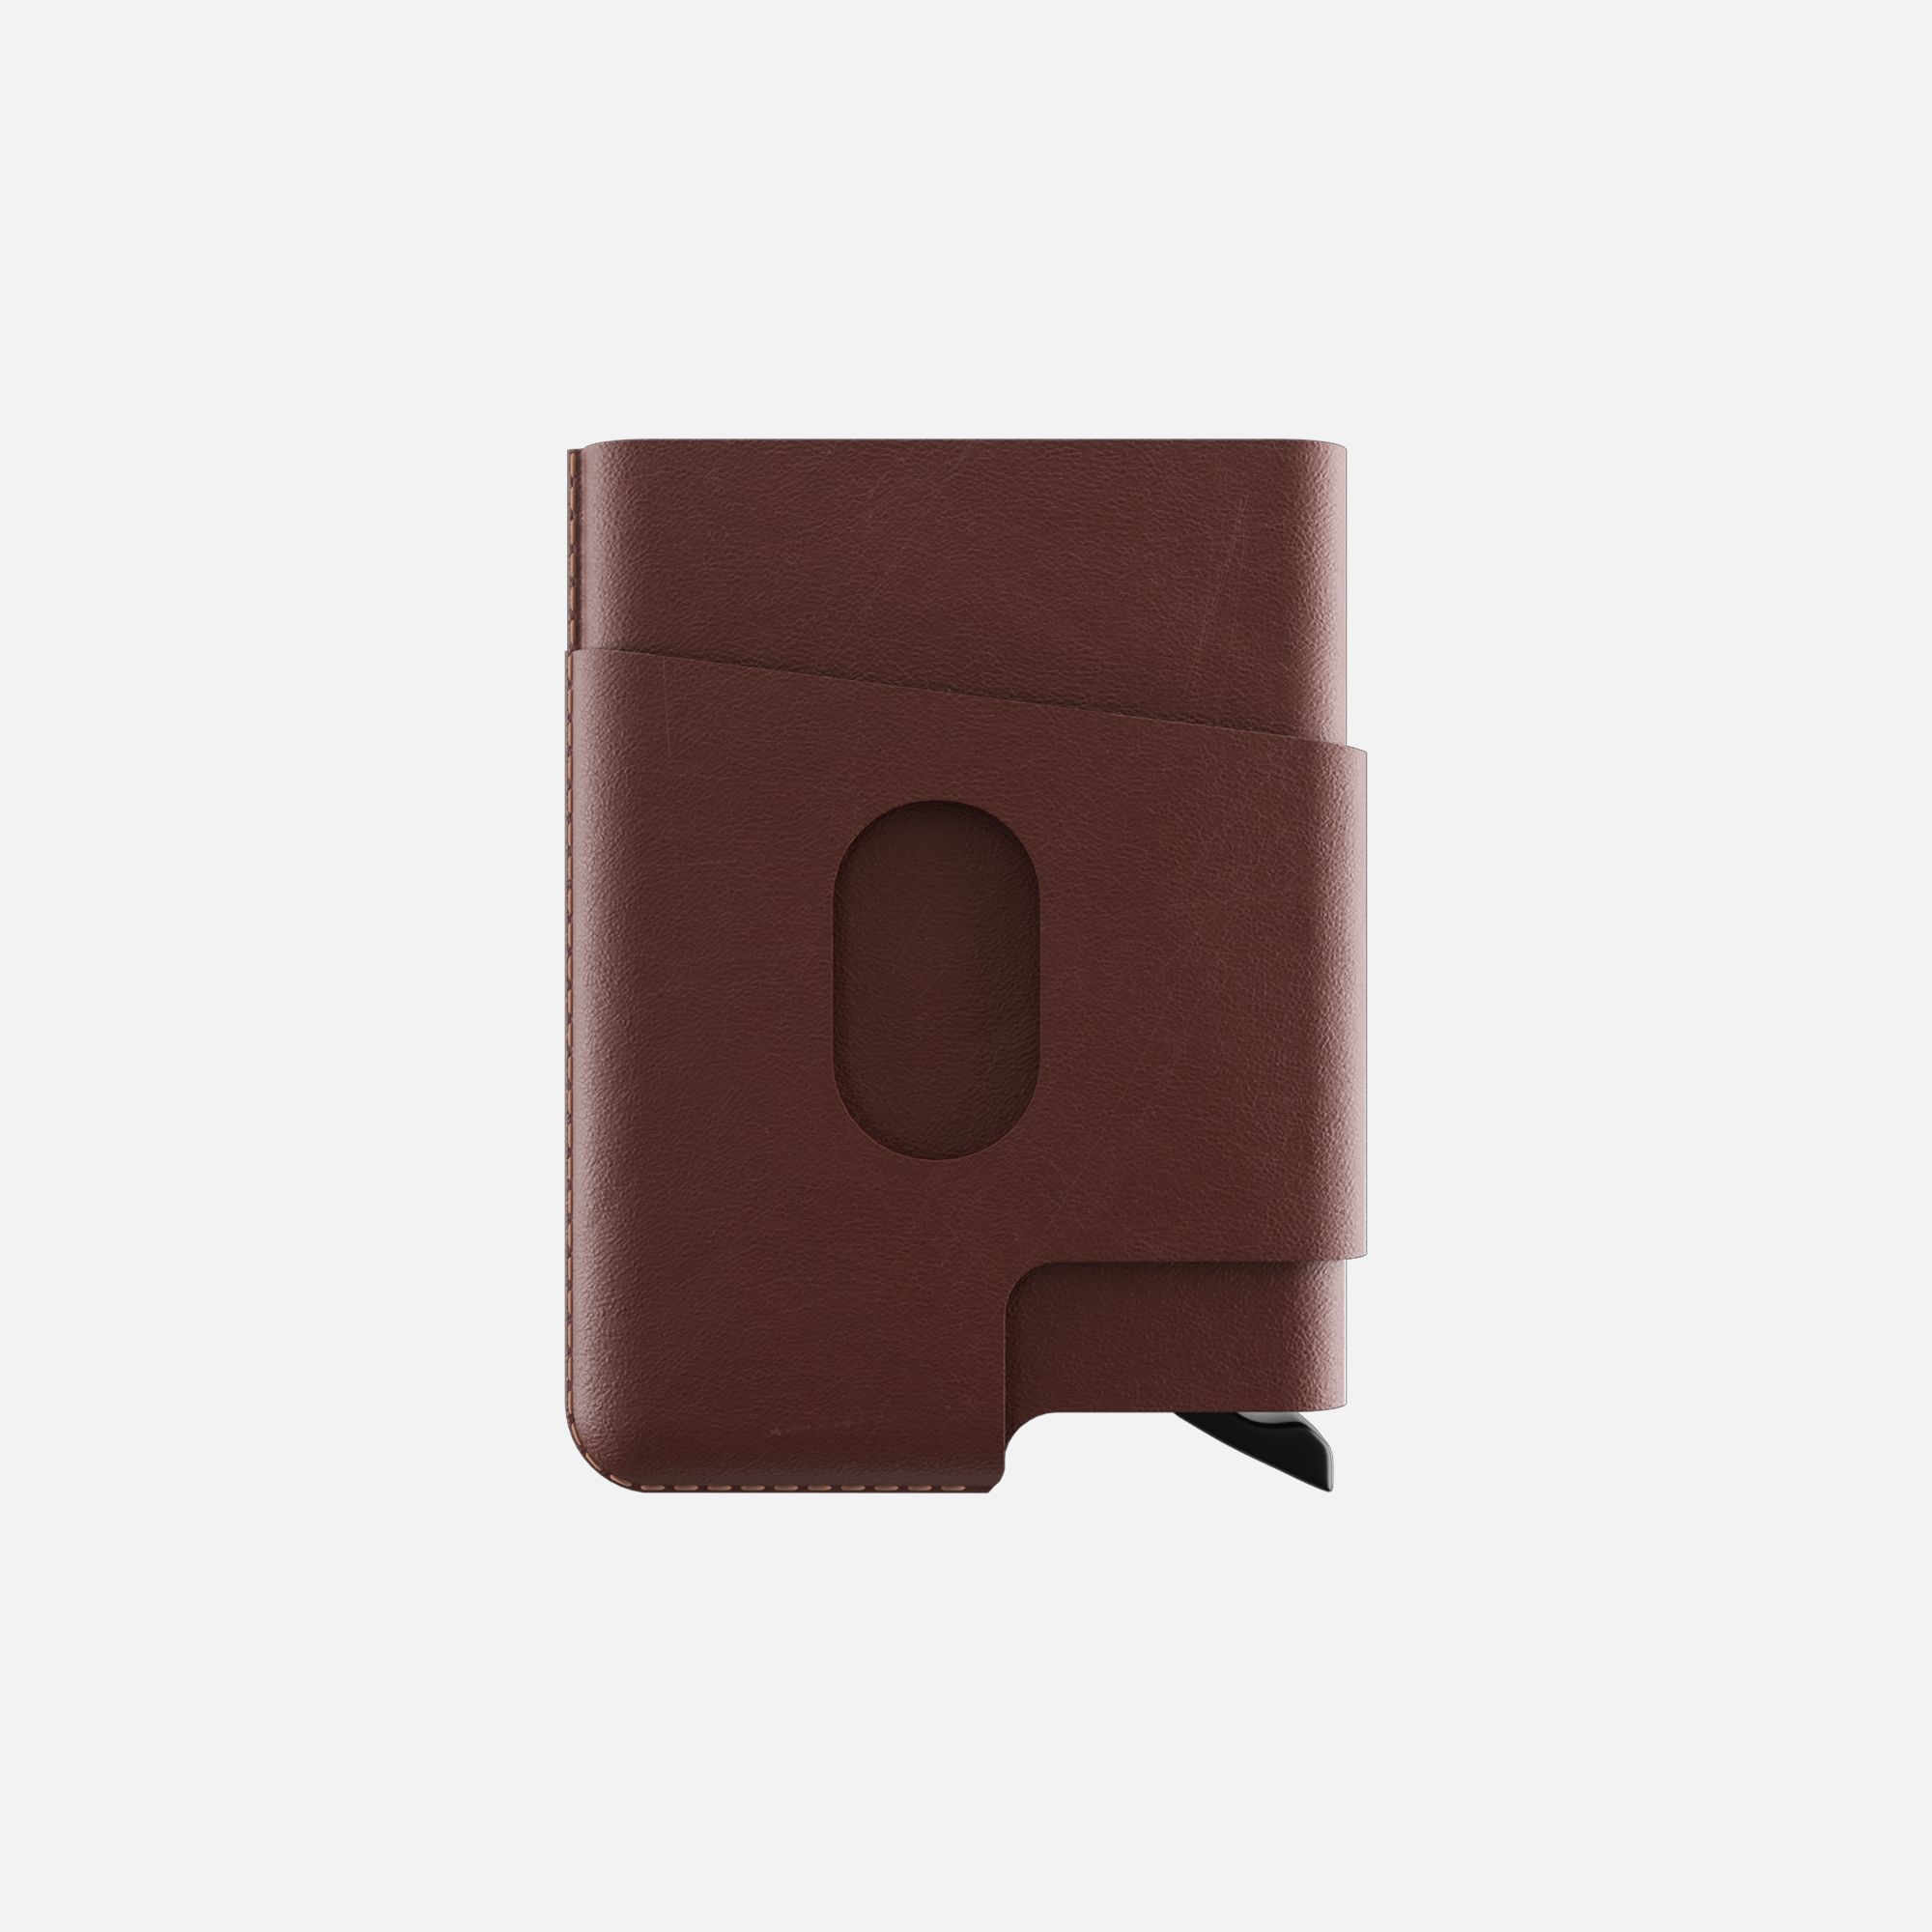 Wallet in brown leather, back view with card holder slot.